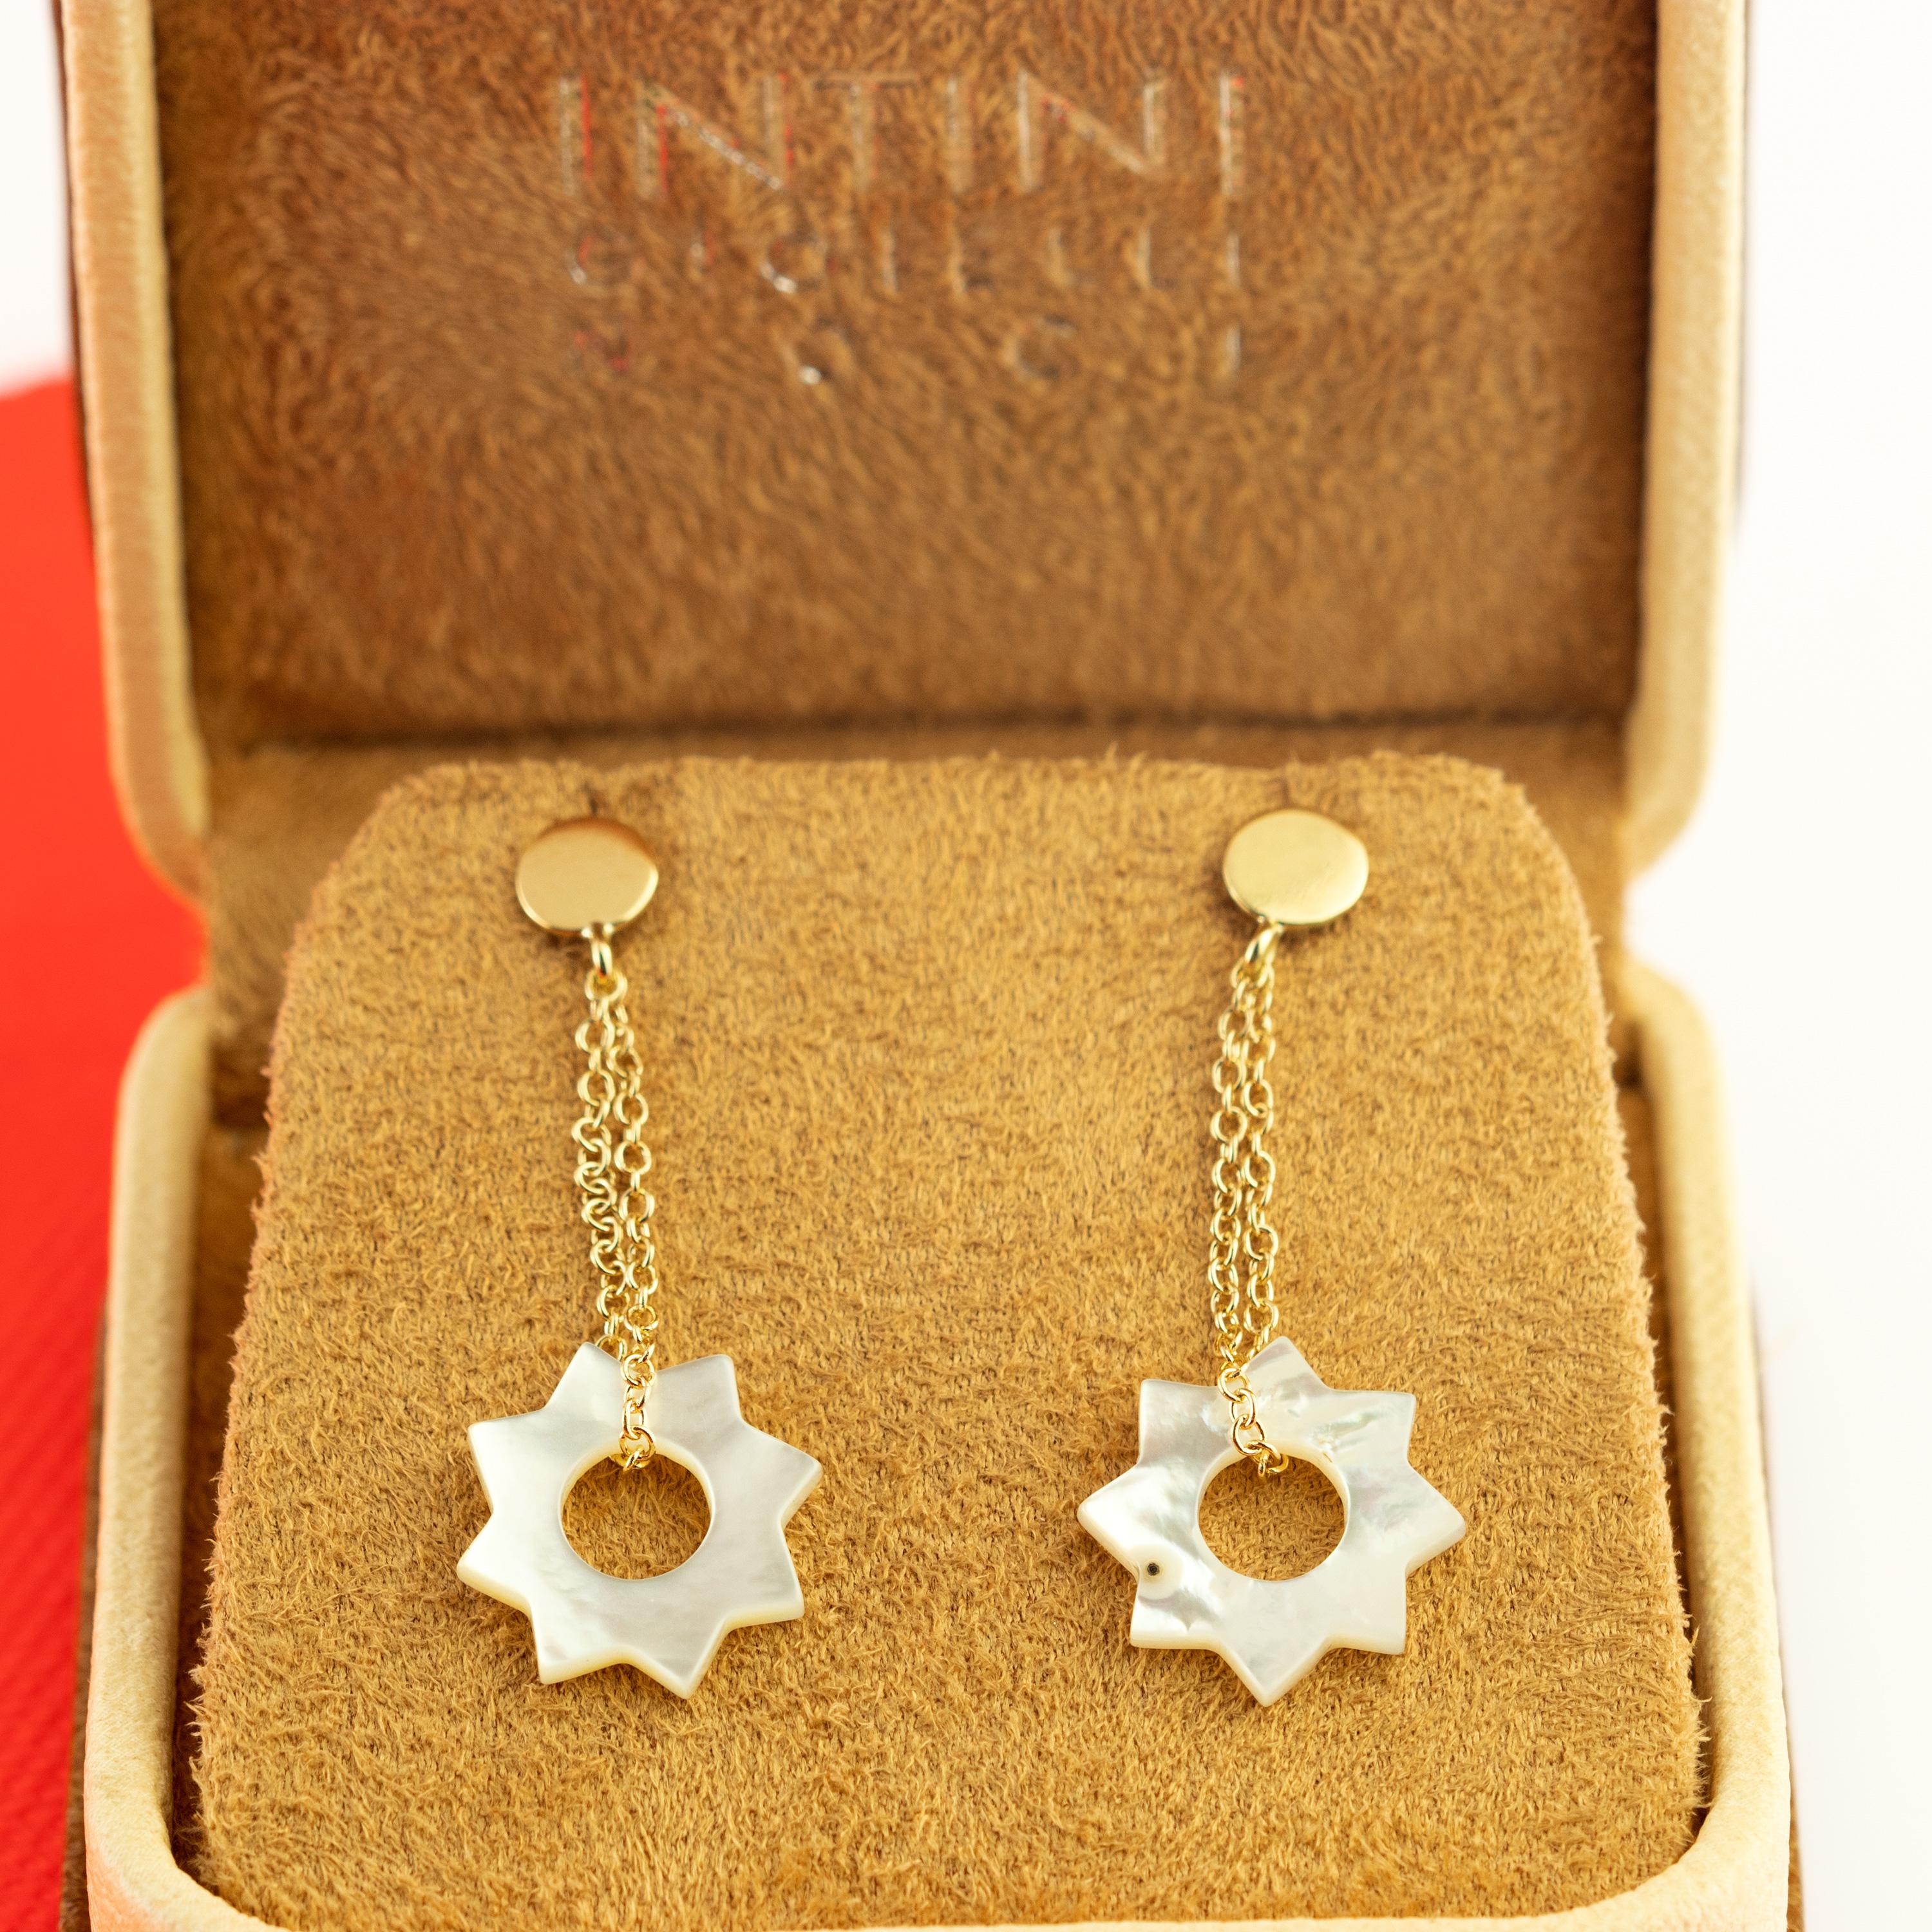 Dangle and drop natural mother of pearl sun shaped earrings with a circle hole inside, holded by 18 Karat Yellow Gold chain. Contemporary and unique piece designed with a modern and youthful style.

These jewels are inspired by the sun symbol.